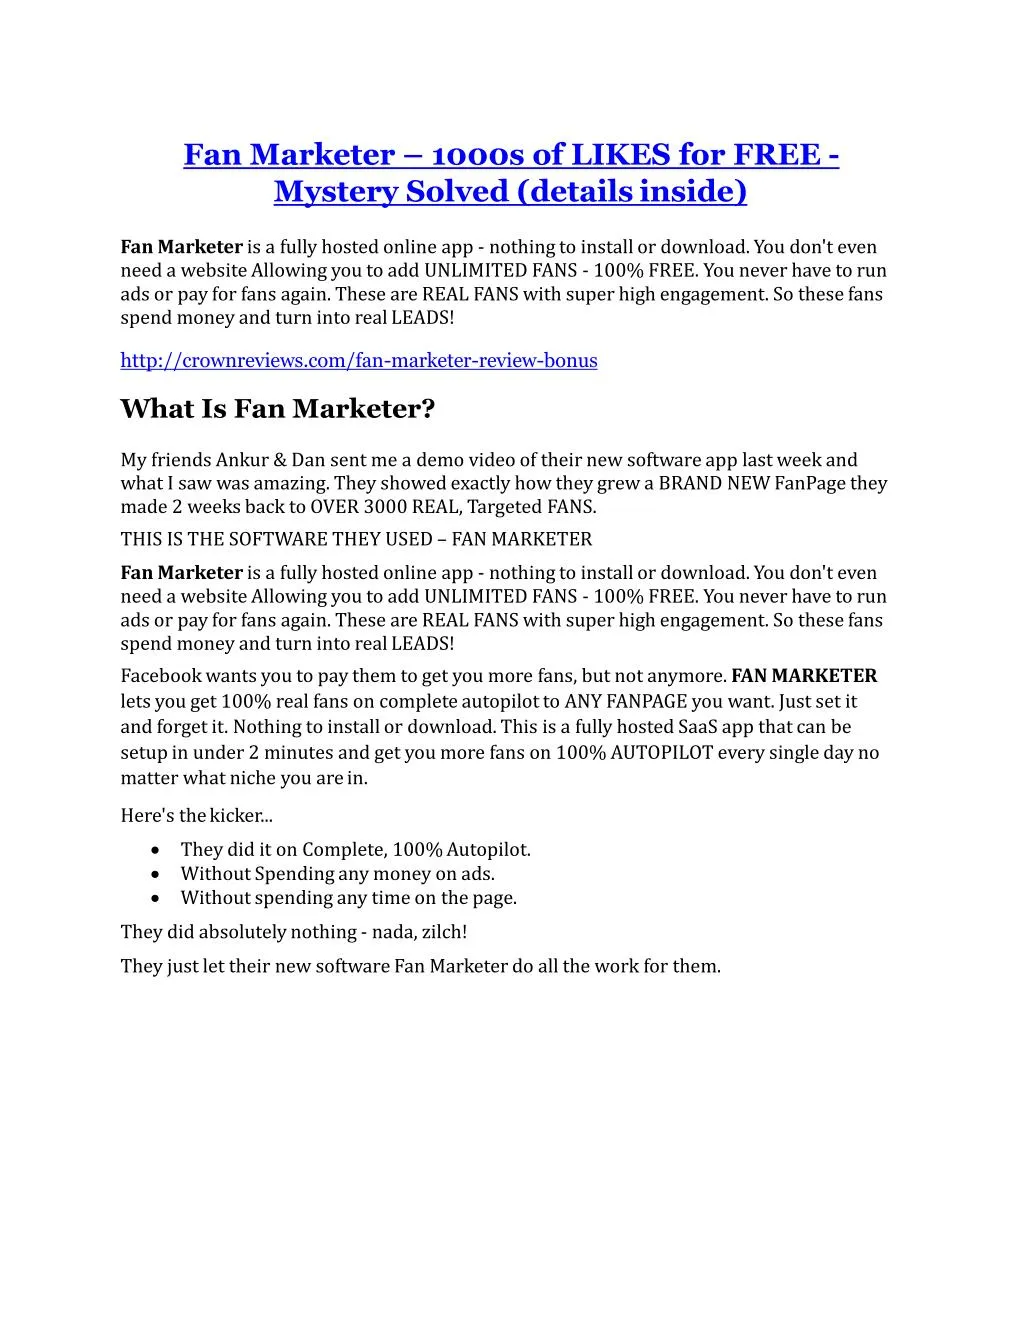 fan marketer 1000s of likes for free mystery